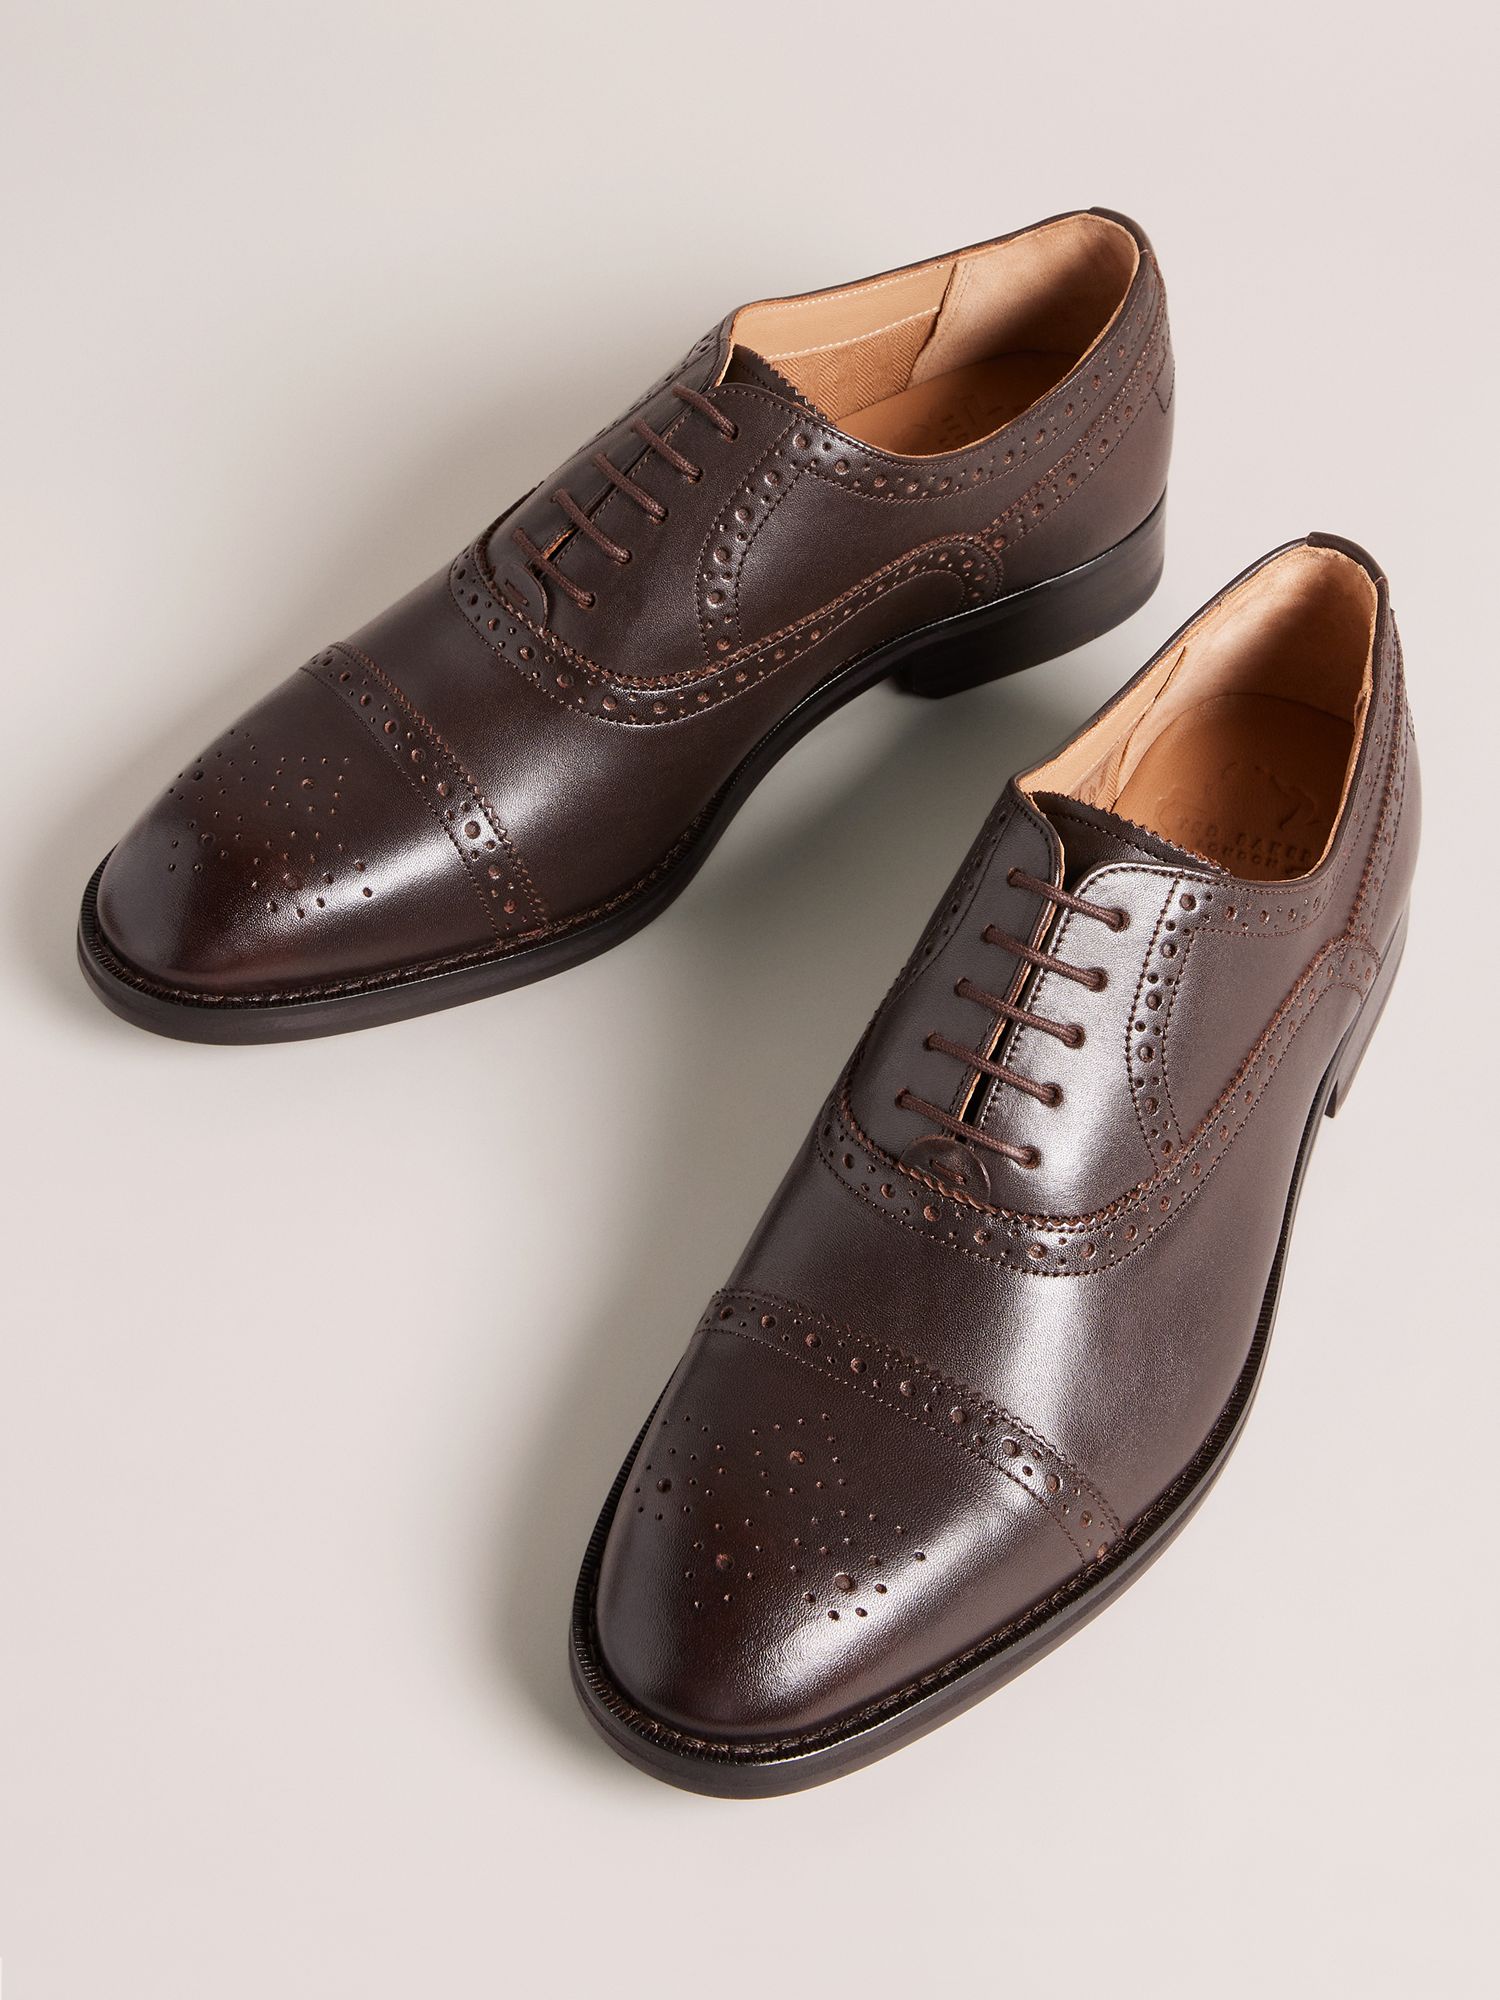 Ted Baker Arnie Leather Oxford Brogues, Brown, EU41